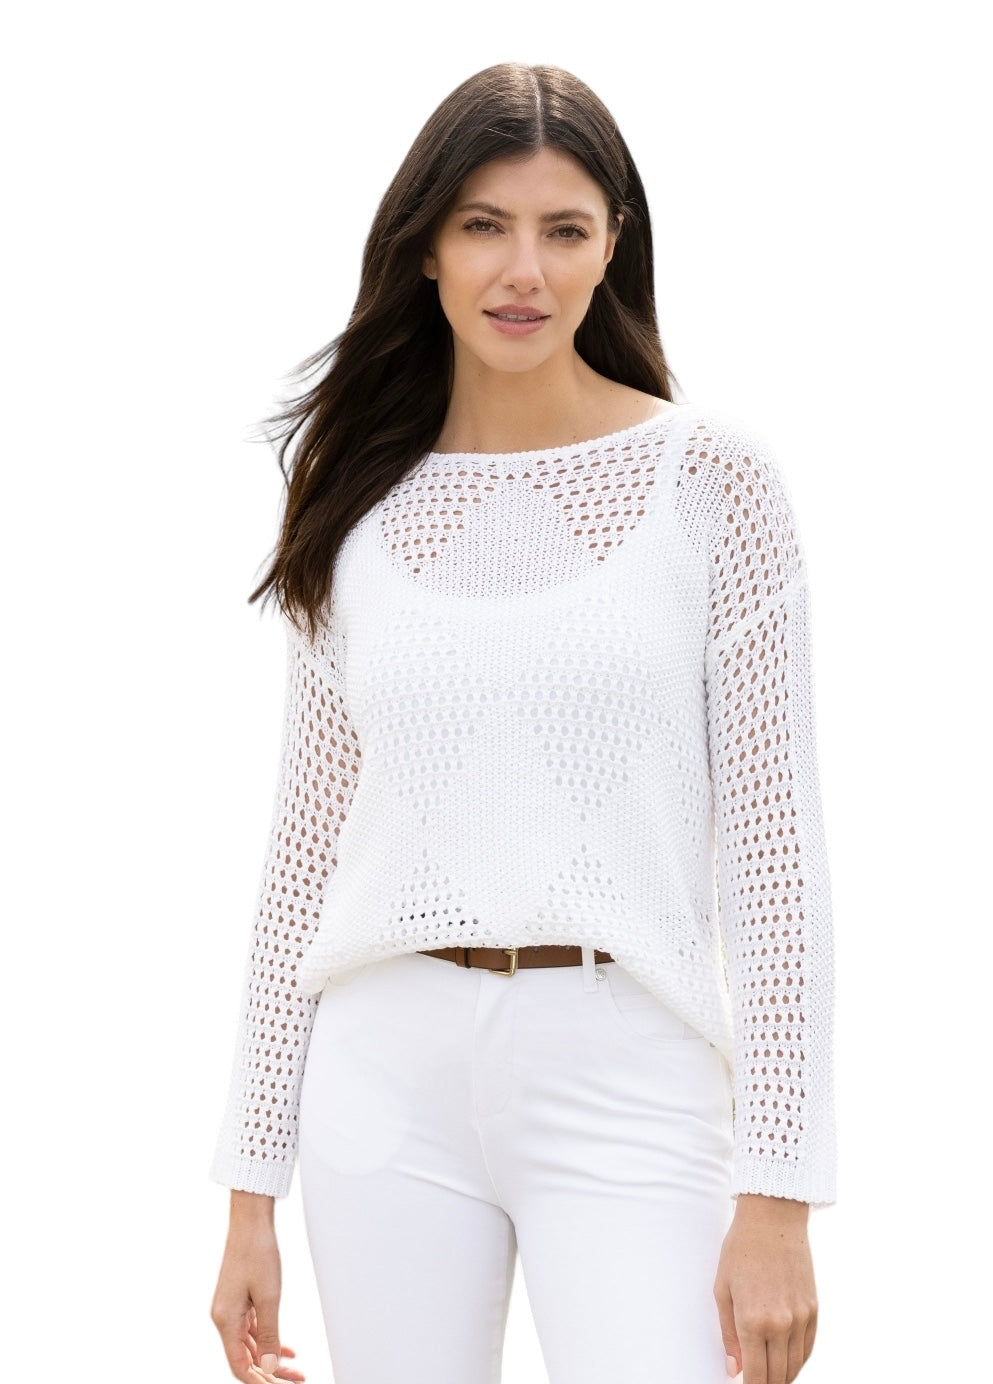 CROCHET TOP AND TANK - WHITE